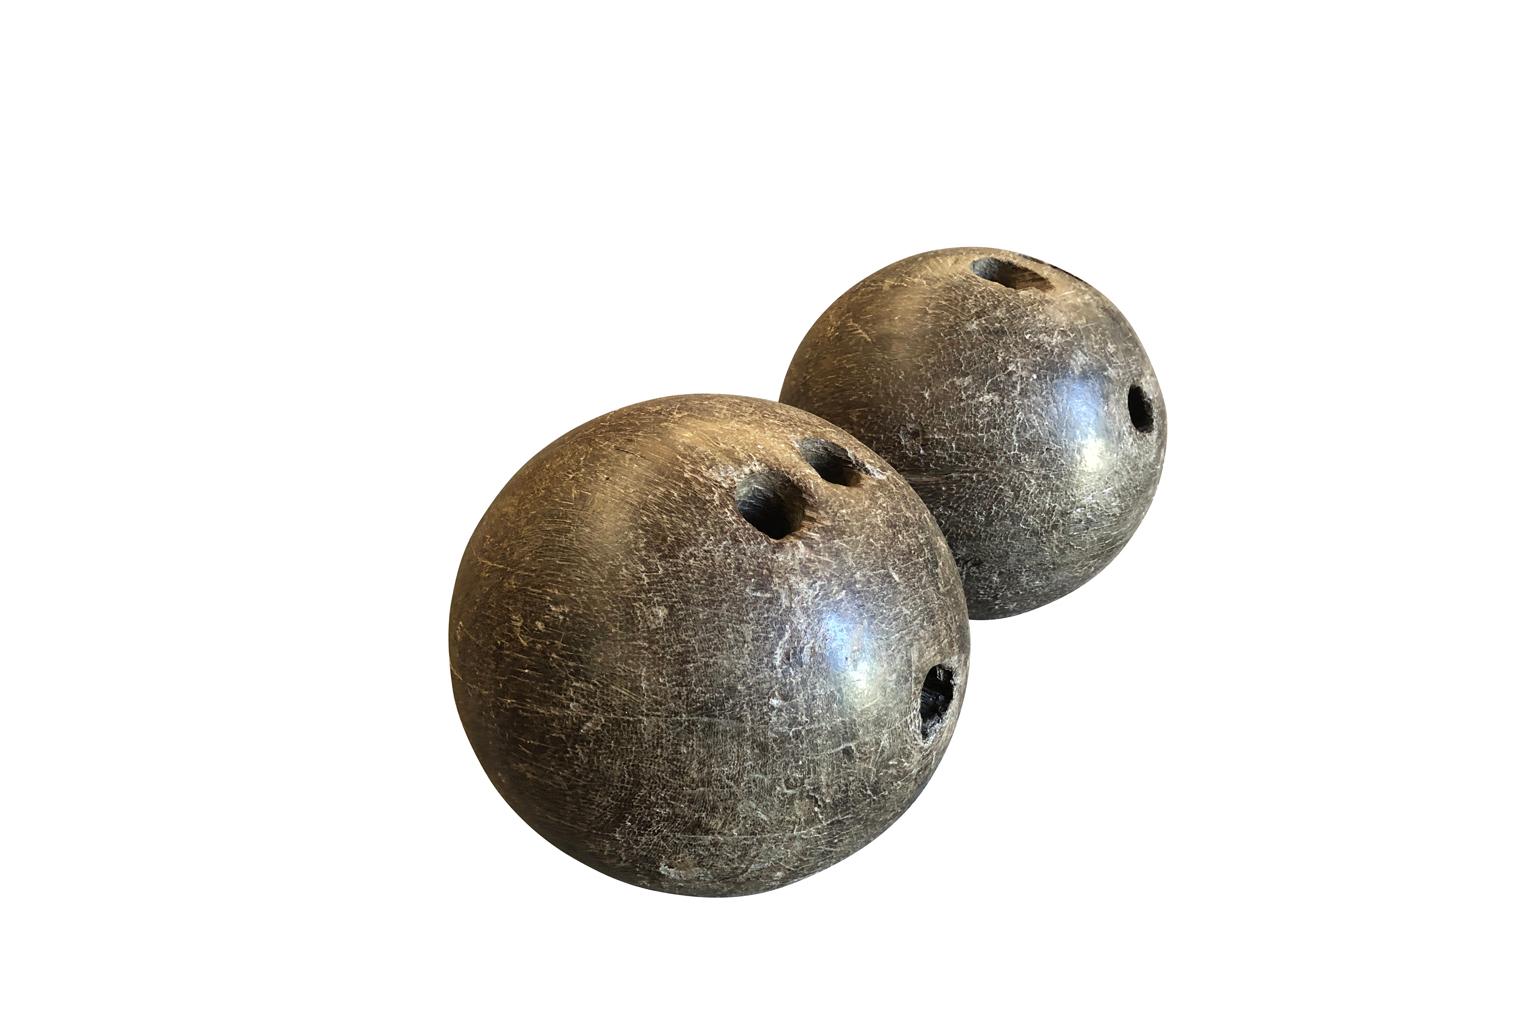 A terrific pair of mid-19th century carved wood bowling balls. A great accessory for any tabletop or bookcase.